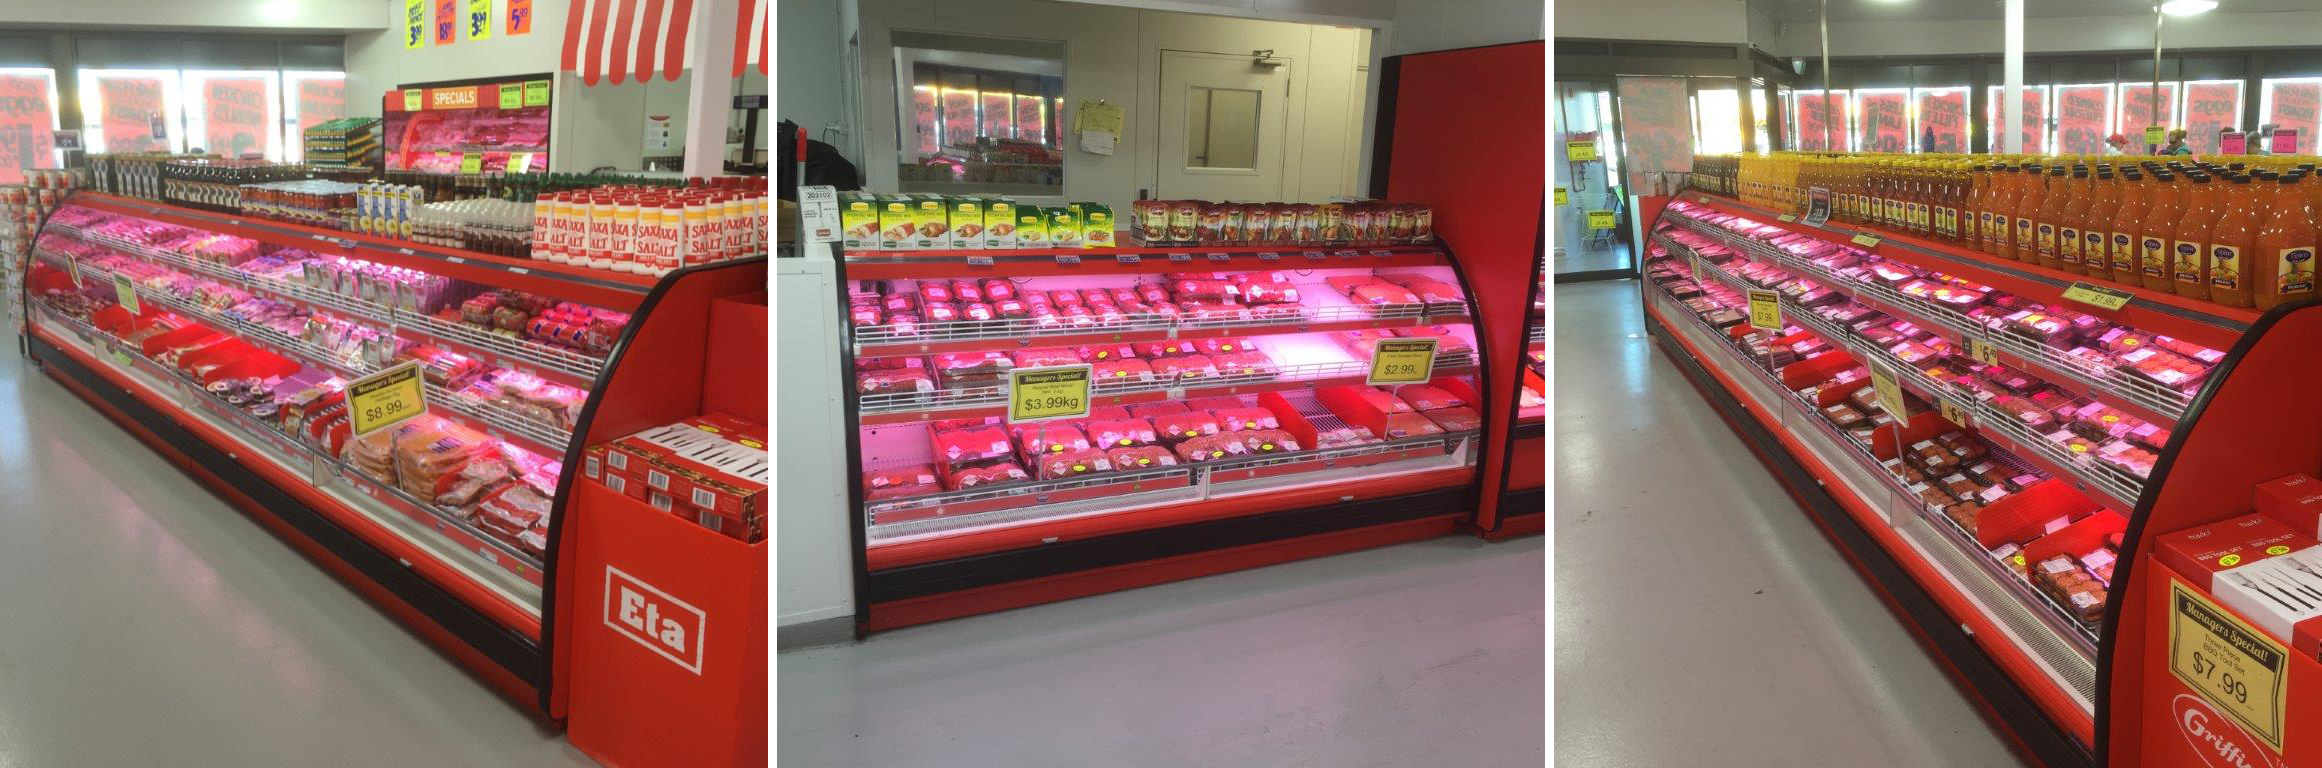 6 ft low vertical multideck meat display cabinets